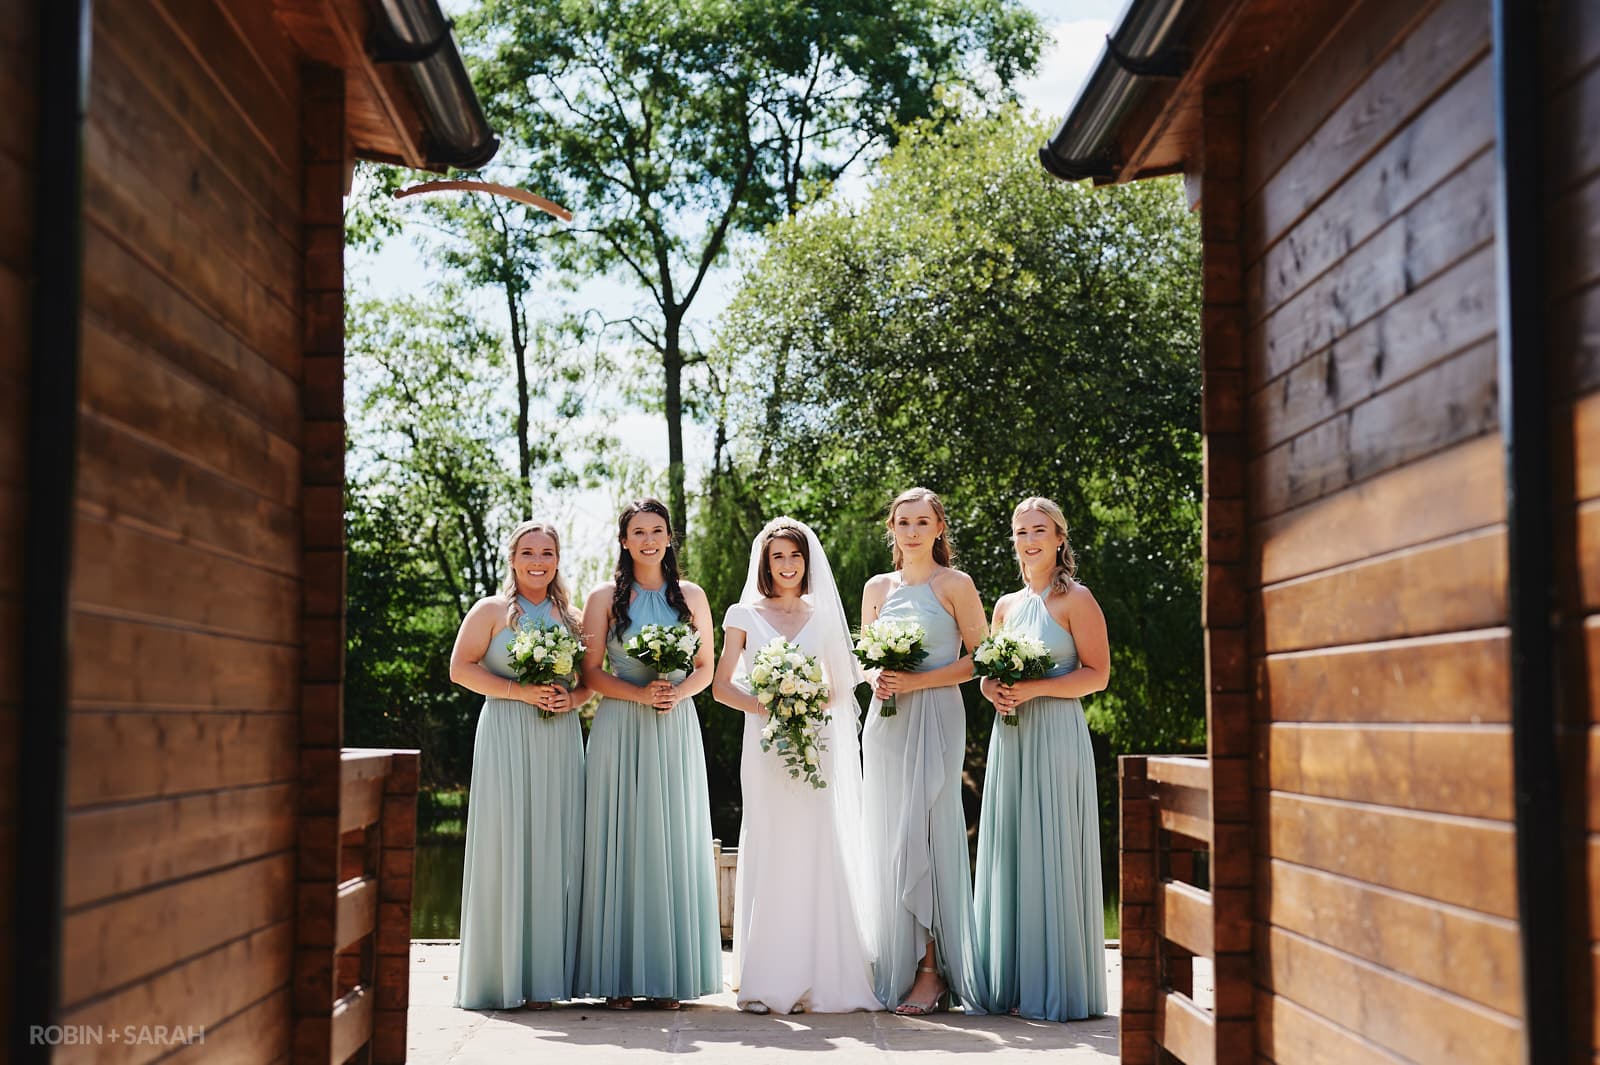 Wedding group photo between chalets at Wethele Manor, or bride and bridesmaids